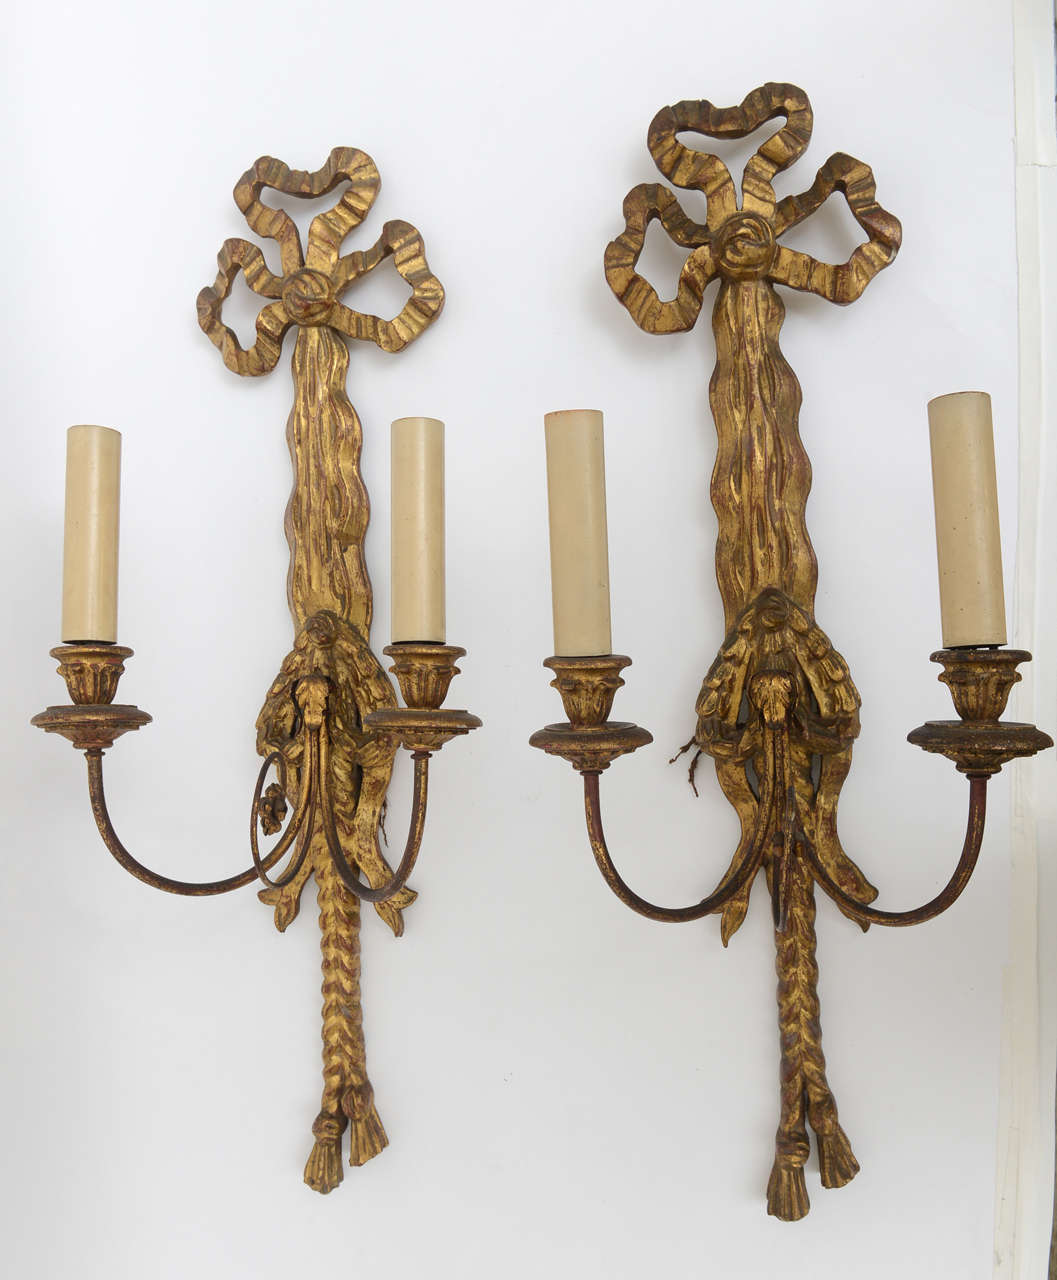 1930s pair of hand-carved wood detailed and brass, two-arm candlestick sconces. Hand-carved wood tassel-roped details, with crimped, festooned bows. Newly re-wired and in working condition. Brass elements are the looped arm extensions of the